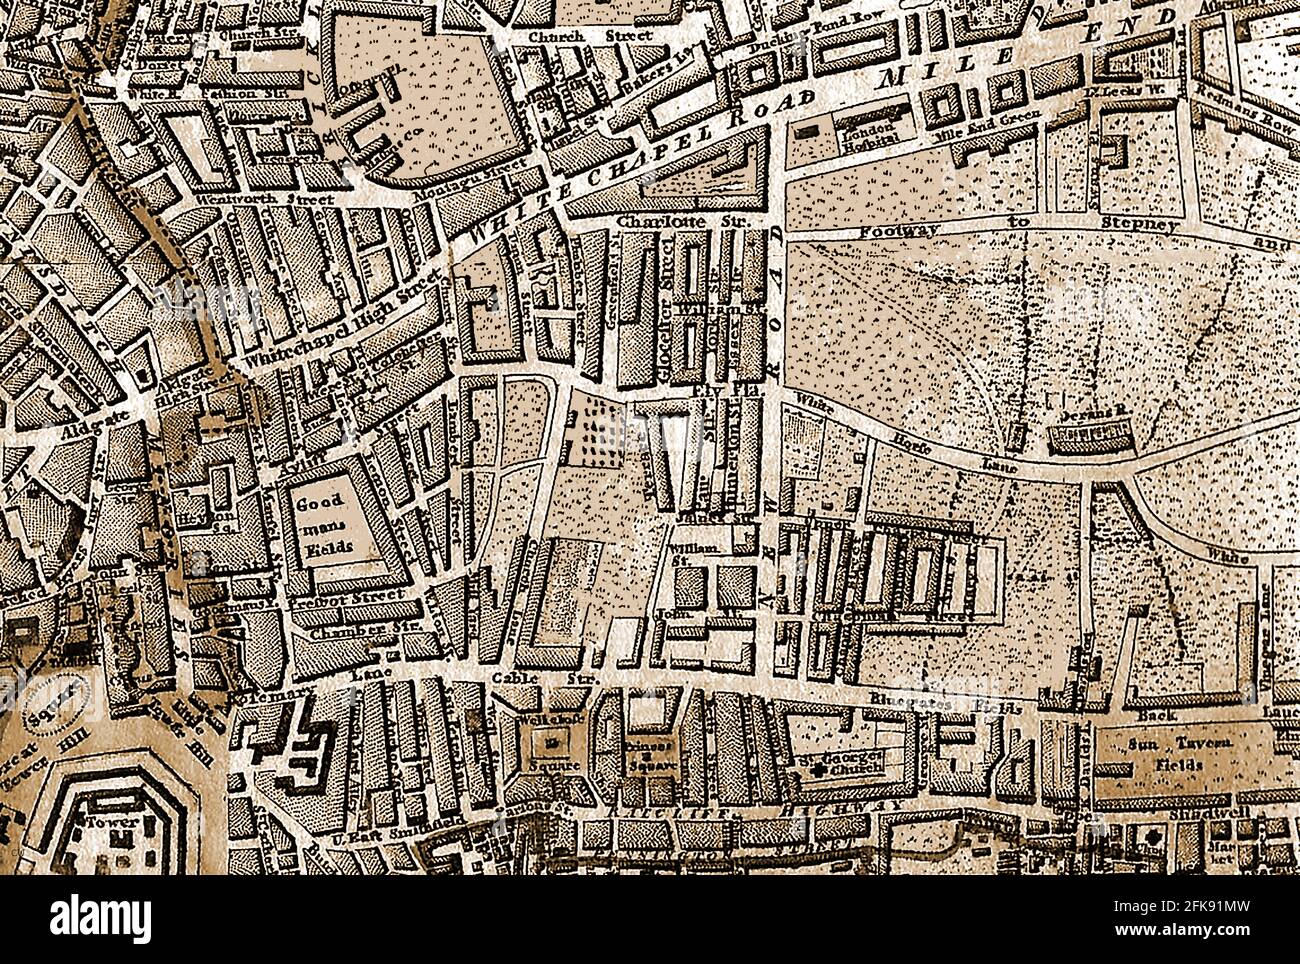 A very early part map of the streets of London England and its features including Whitechapel road, sun tavern fields,Goodmans fields,Mile End,green,Whitechapel high street,aldgate,tower of london,tower hill, Bluegates fields,Petticoat Lane, St Georges Church, White Horse Lane, Wentworth Street, Redmans Row, London Hospital, Mile End, Charlotte Street, Montagu Street, Ducking Pond row, Brick Lane, Bakers Lane,Back Lane, Cable Street, Rosemary Lane, Princes Square Well Close Square, Well Street, Lambert Street , Great Tower Hill, Little Tower Hill, Ratclife highway, Pennington Street, etc Stock Photo